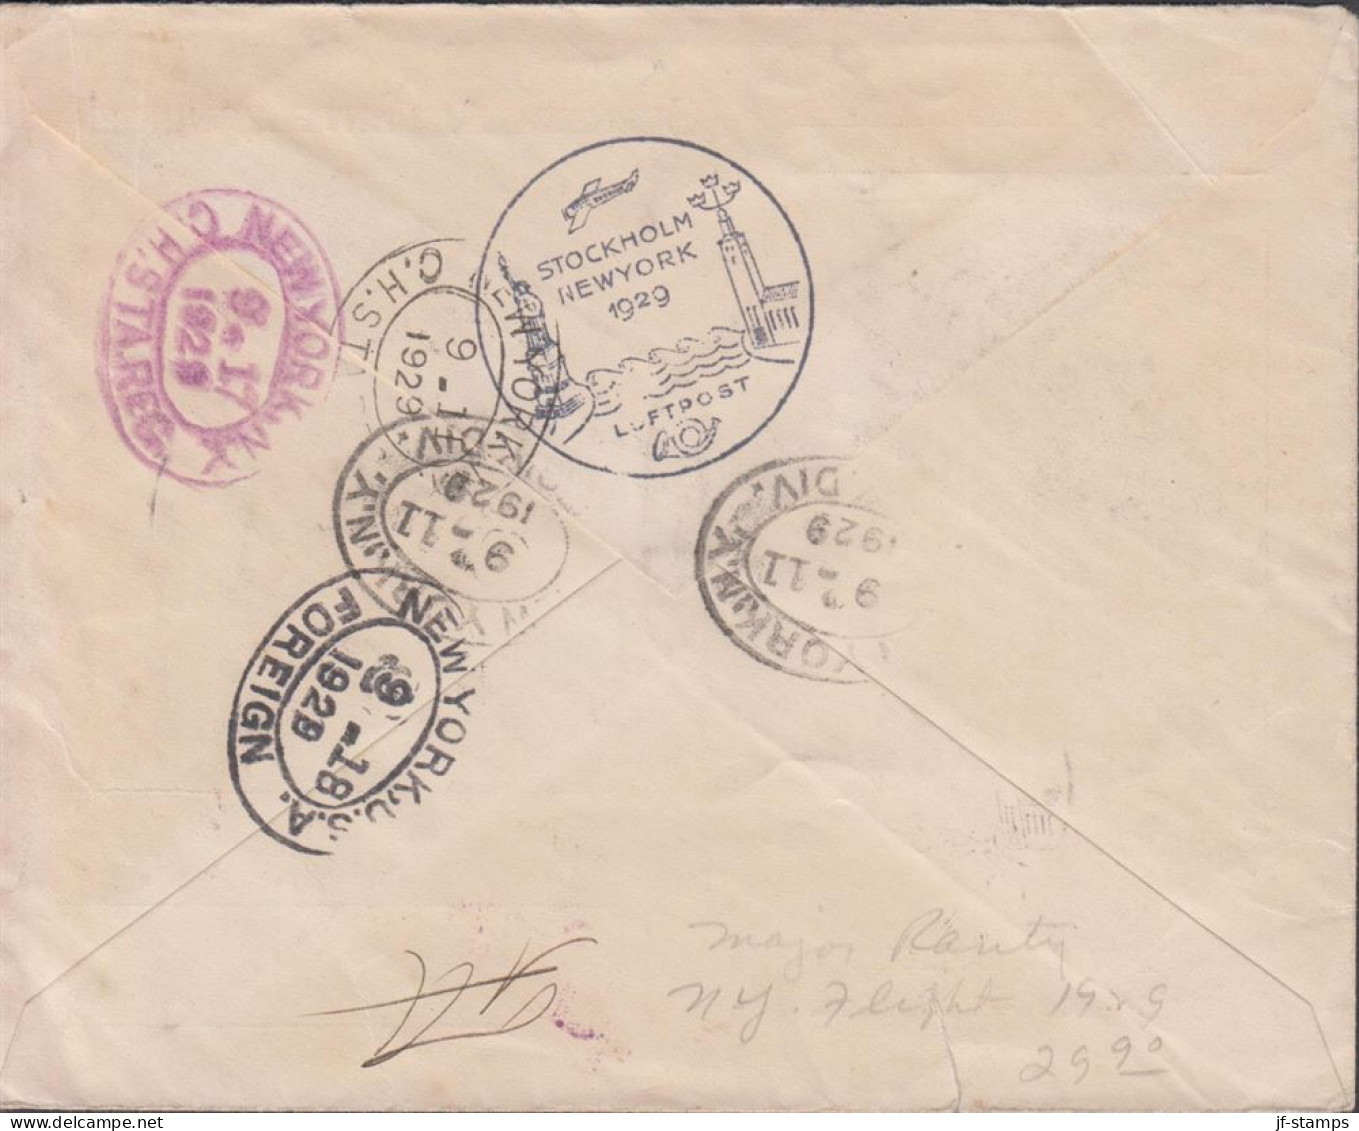 1929. SVERIGE. SVENSKA ATLANTFLYGNINGEN Official Cover (tear) With Picture Of The Pilots Canc... (MICHEL 63+) - JF444770 - Lettres & Documents